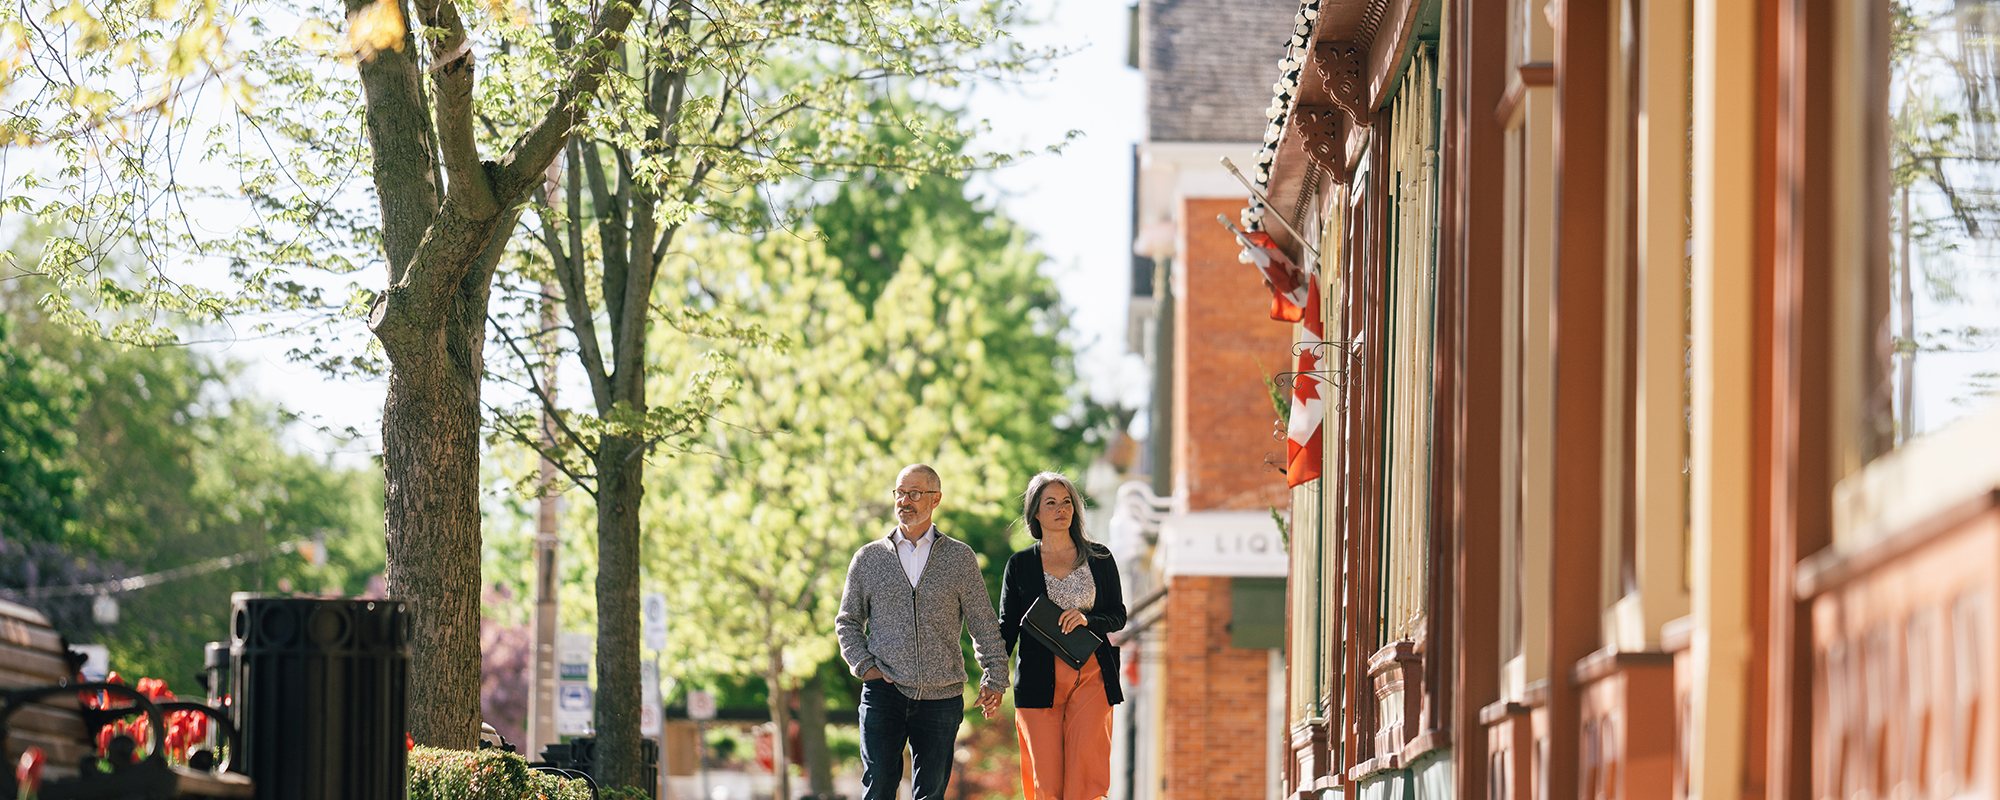 An older couple walking down the side walk looking into the windows of boutique shops in Niagara-on-the-Lake.